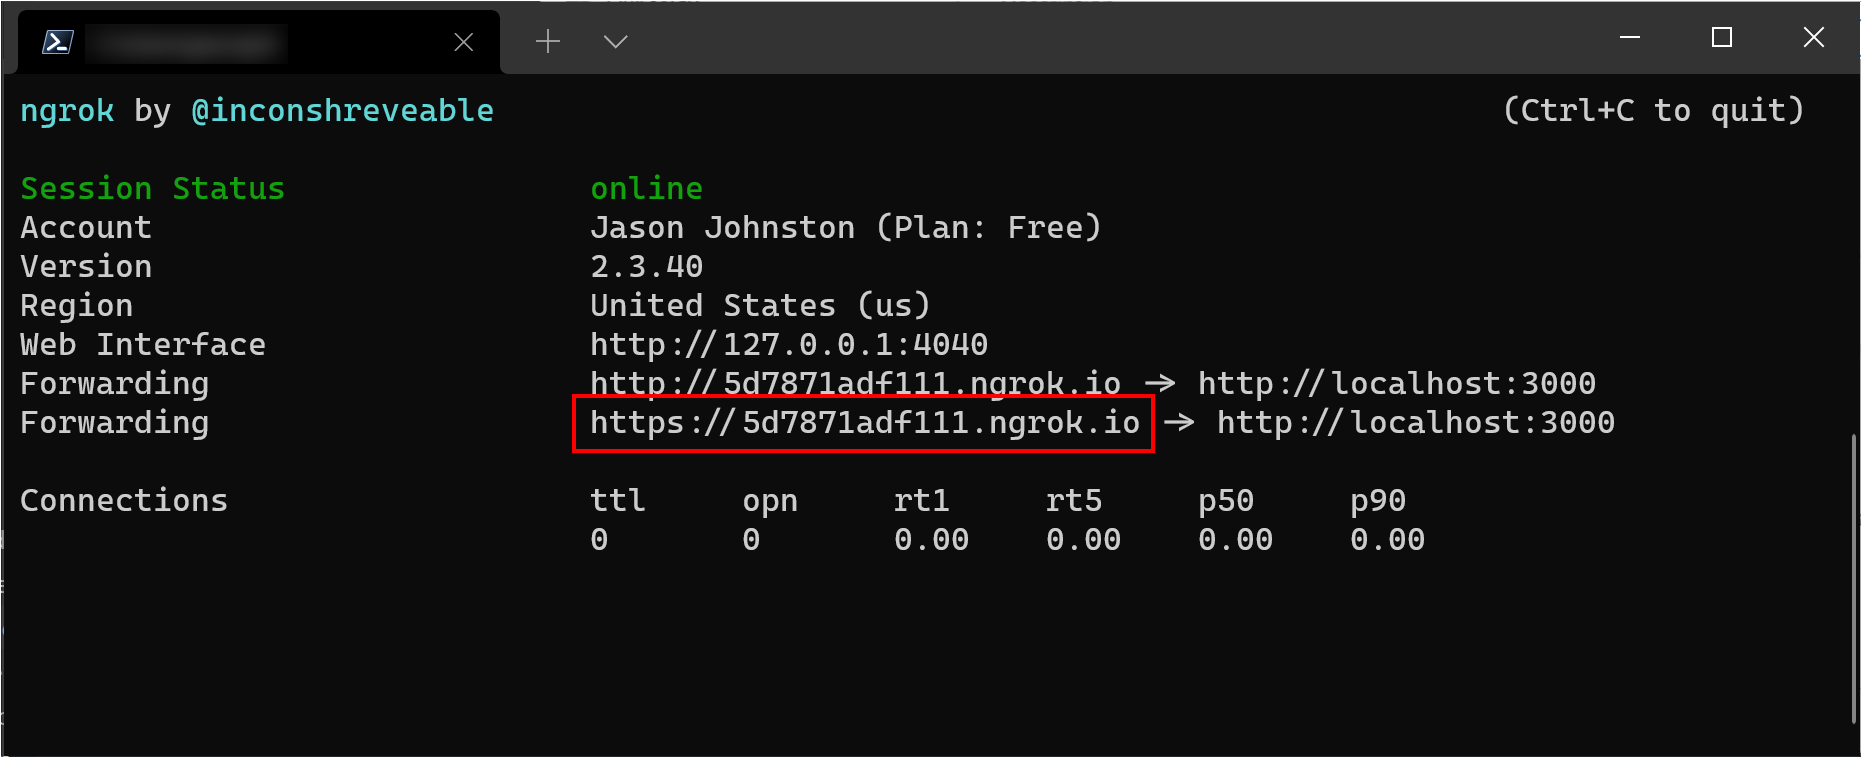 The forwarding HTTPS URL in the ngrok console